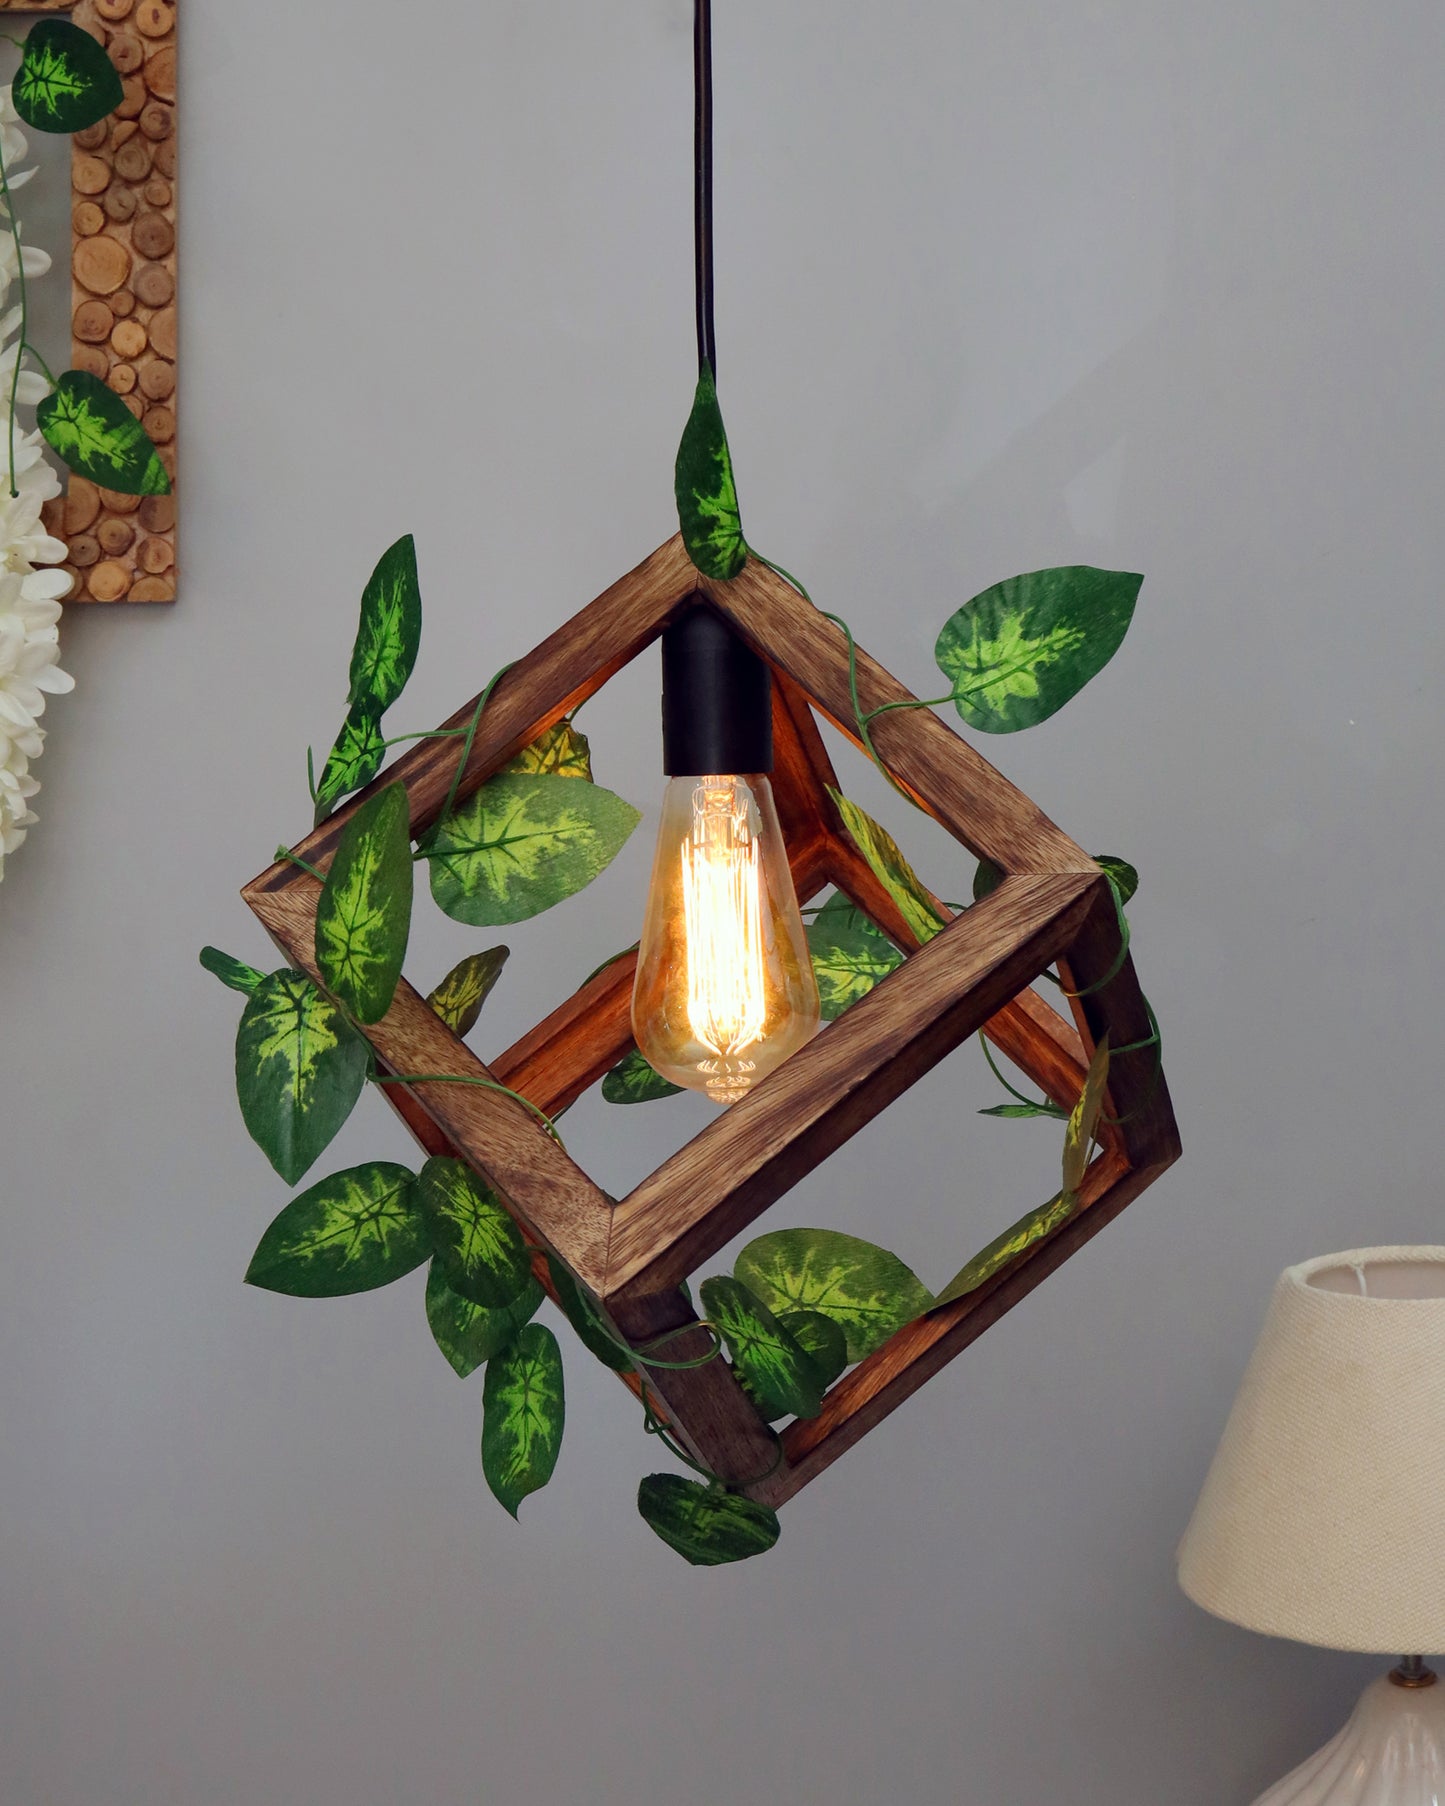 Hanging Pendant Plant Light Fixtures Creative Home Decor Living Room Dining, Ceiling light with leafy vine and filament bulb, Antique Wood Cube